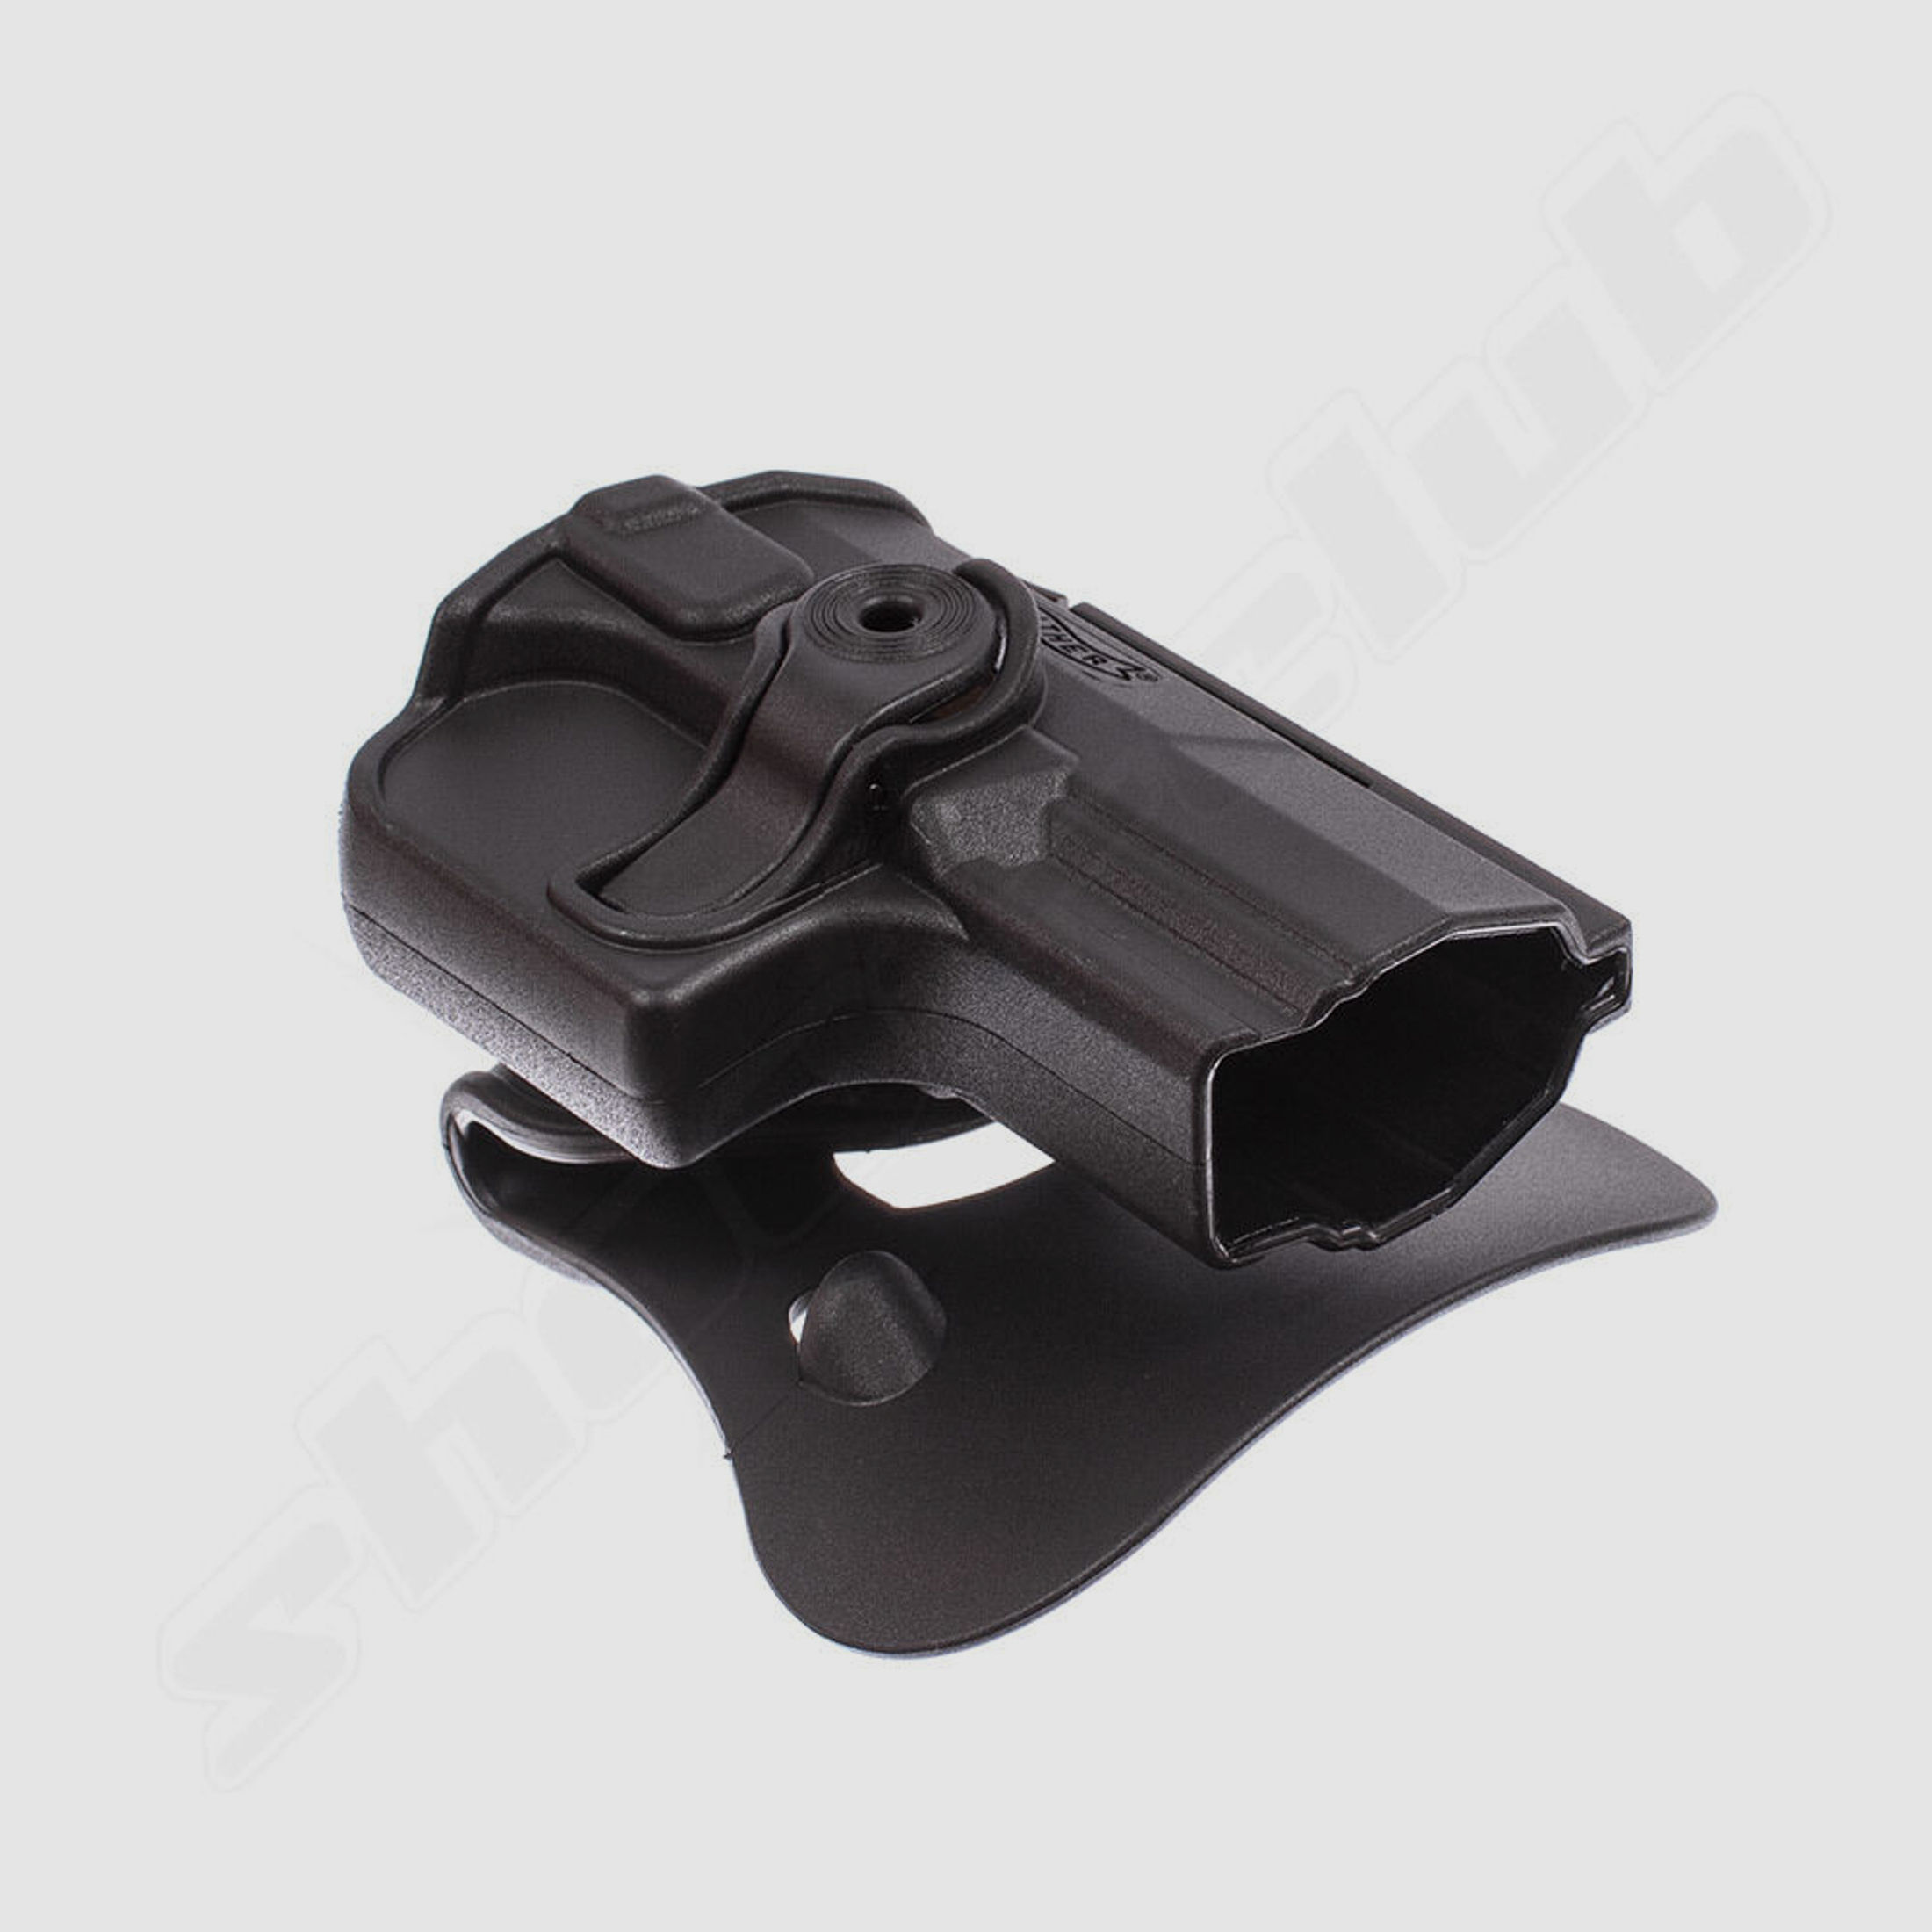 Carl Walther GmbH	 Walther - Defense P99 & PPQ Polymer Paddle Holster